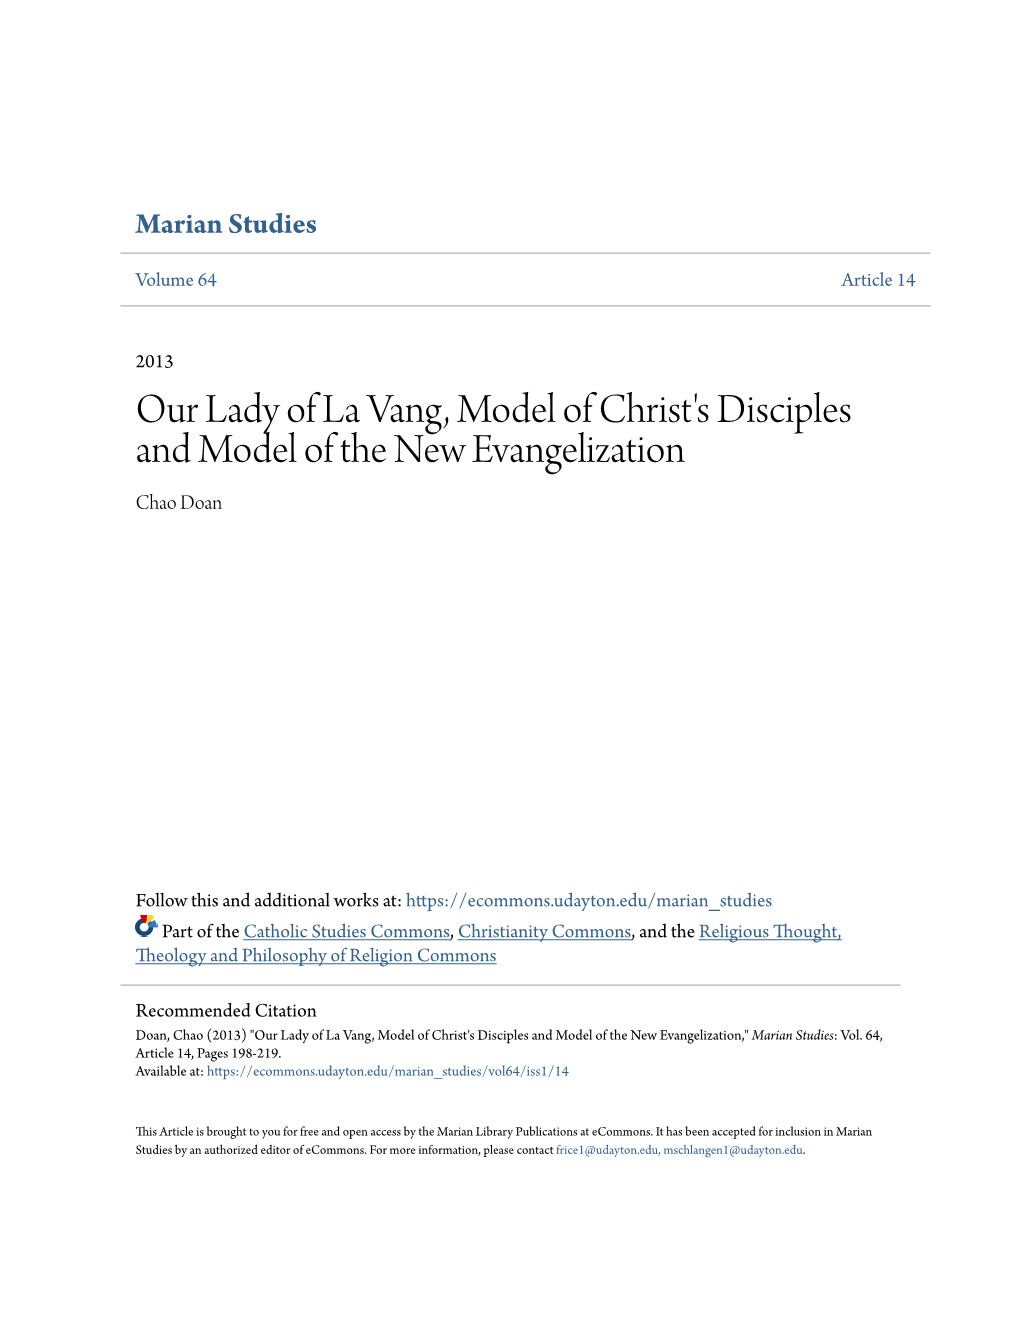 Our Lady of La Vang, Model of Christ's Disciples and Model of the New Evangelization Chao Doan